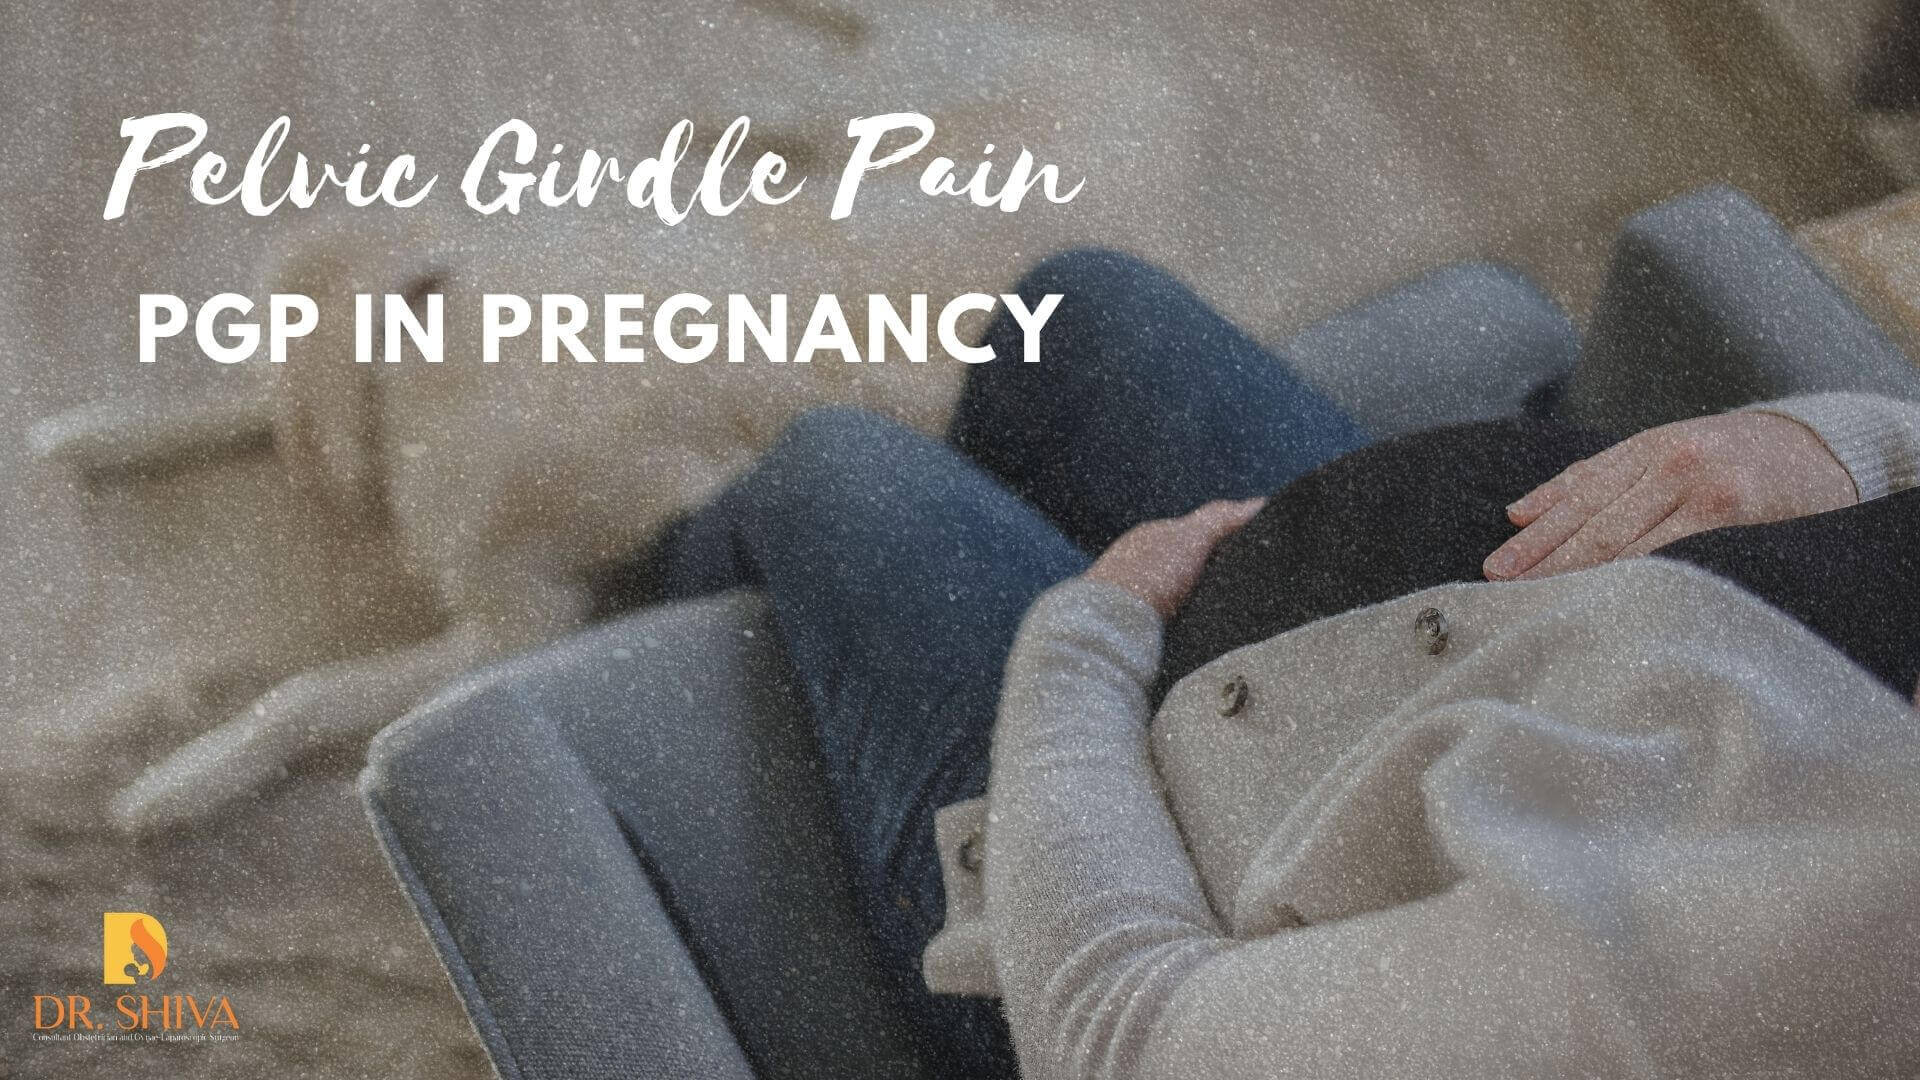 Pelvic girdle pain(PGP) and pregnancy